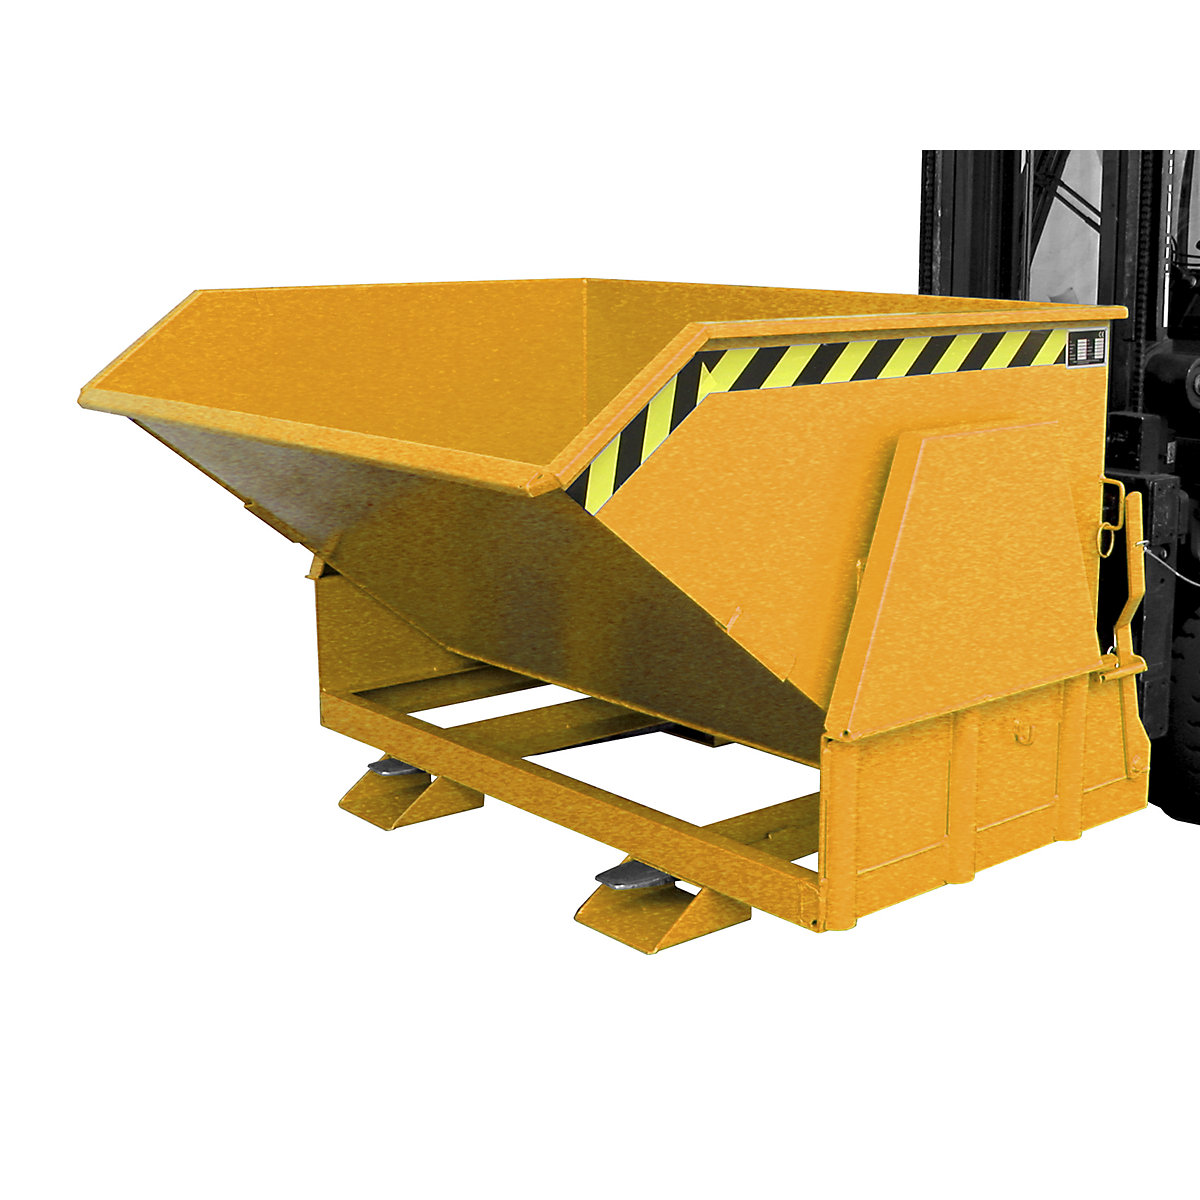 Tilting skip, standard overall height, without wheels – eurokraft pro, capacity 1.2 m³, painted orange RAL 2000-11